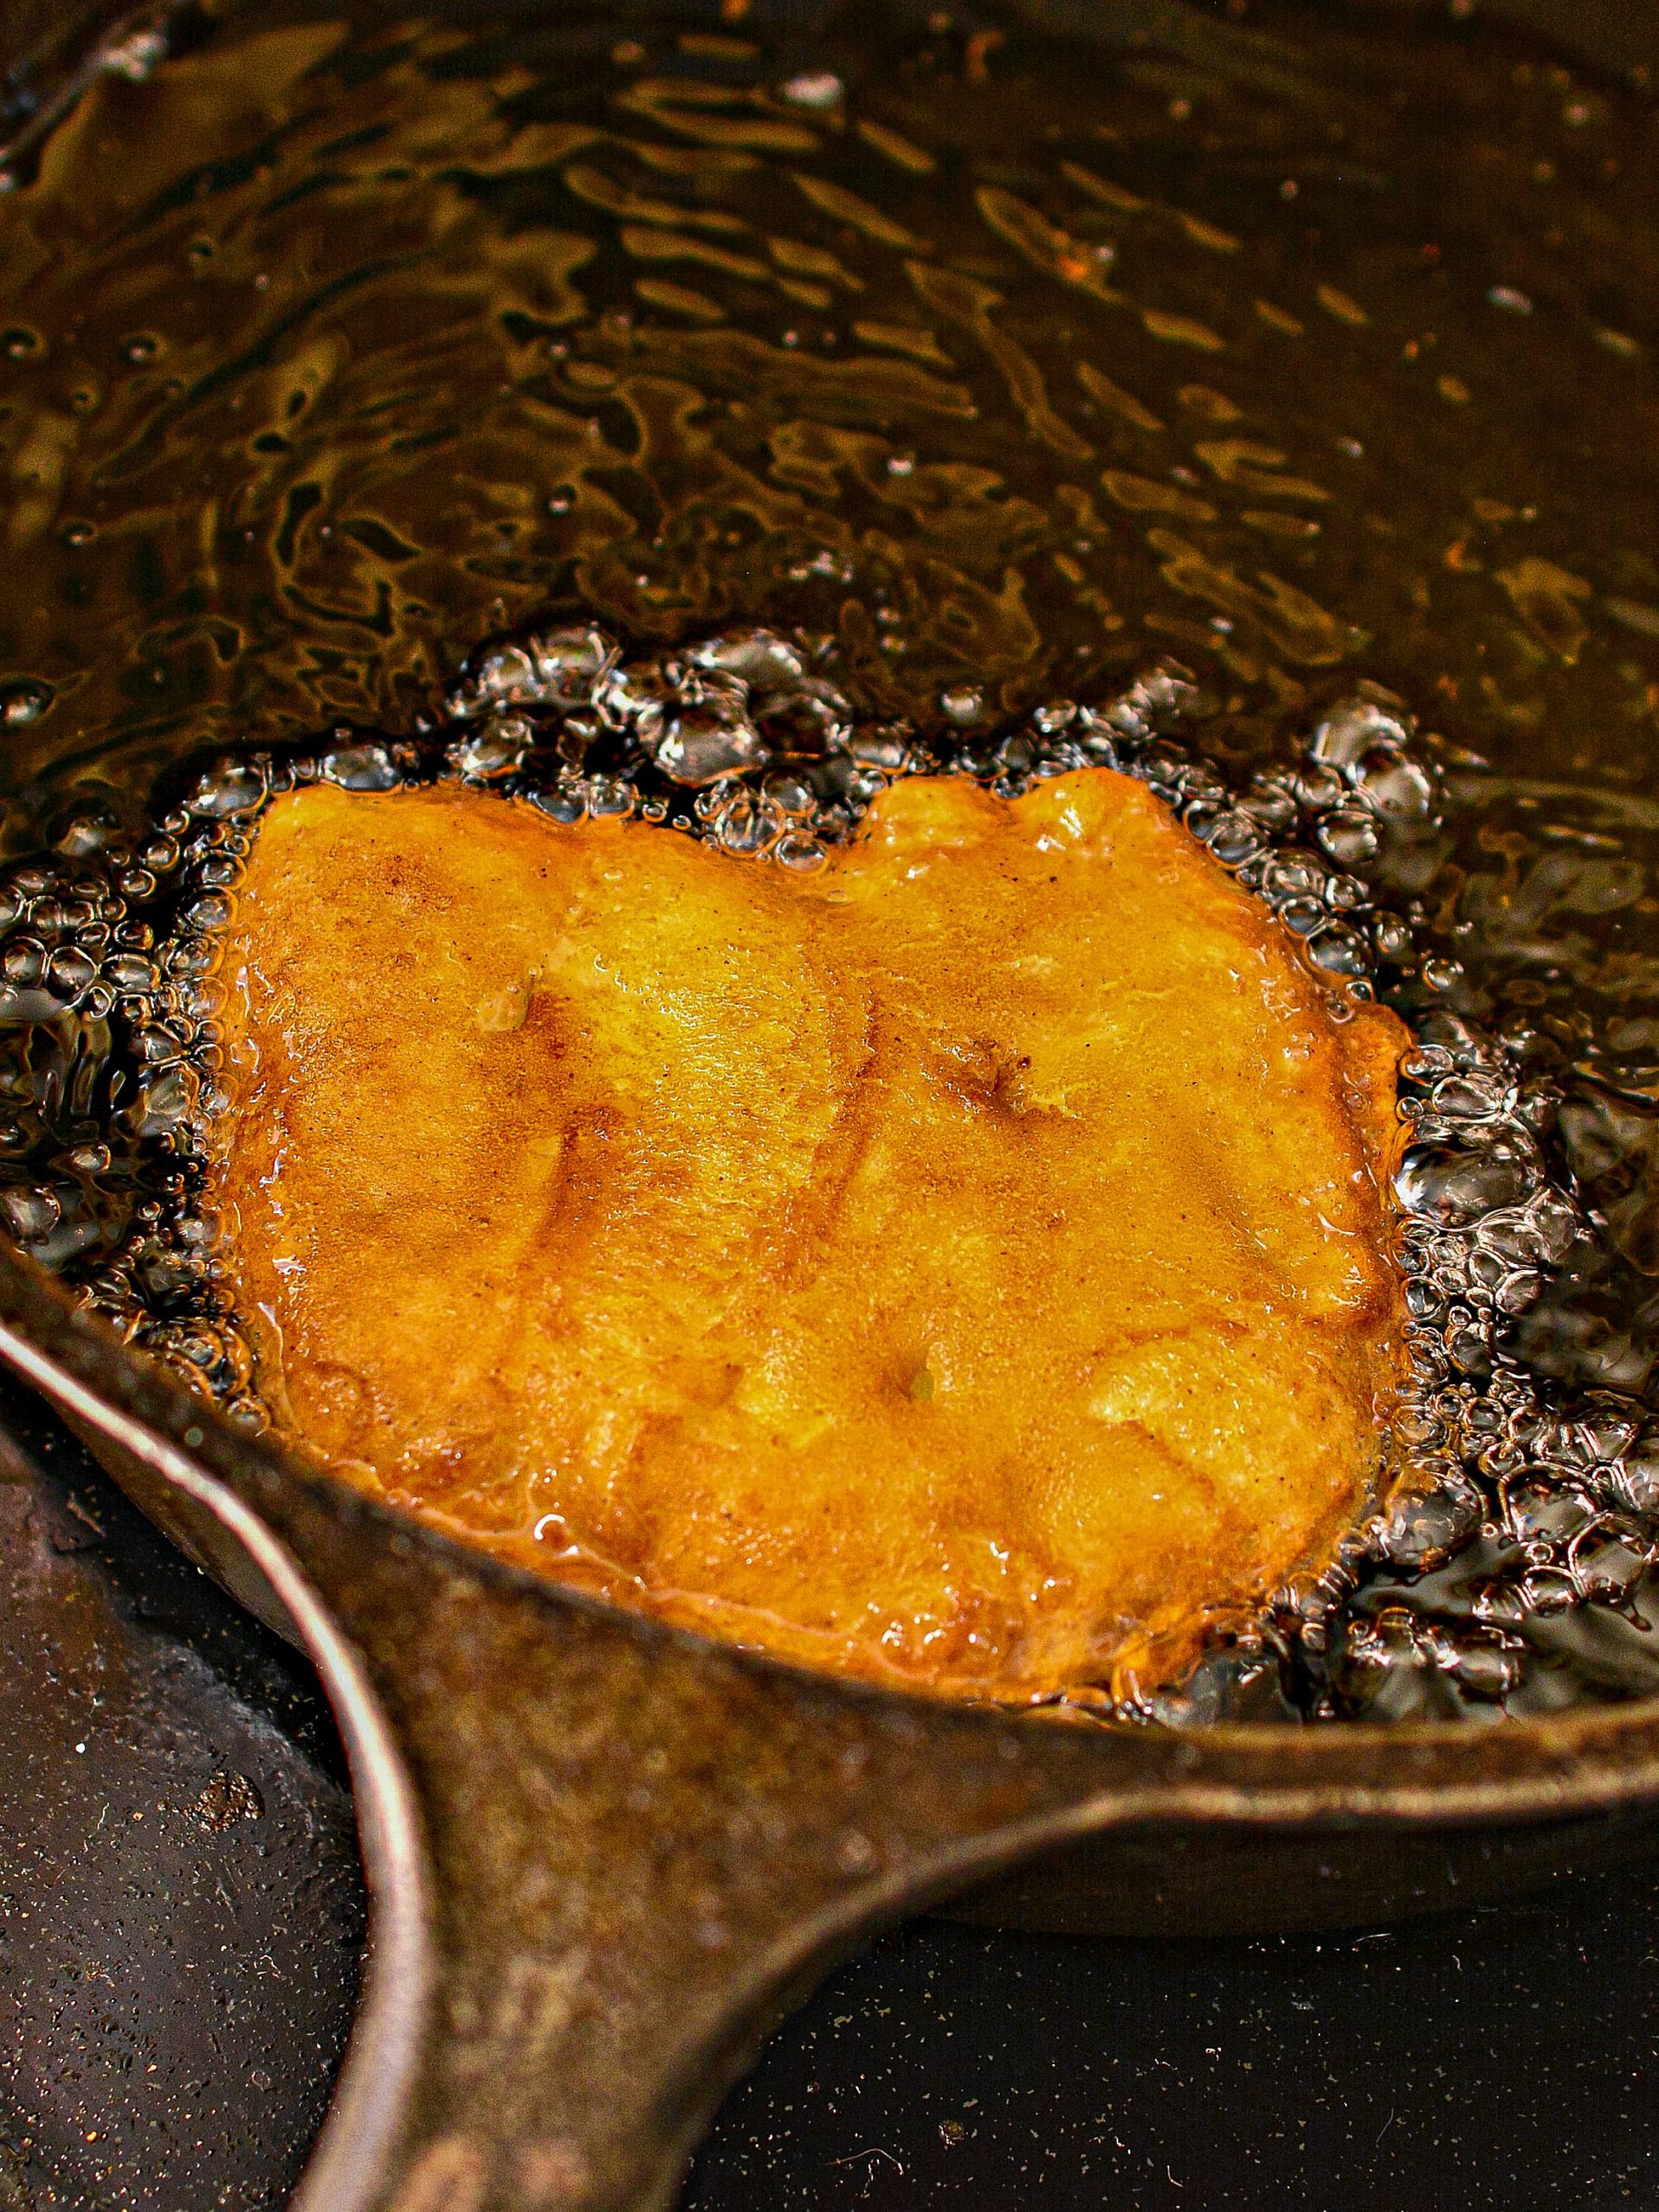 Place ⅓ - ½ cup of the batter into the heated oil, and press it down flat with a metal spatula or cooking spoon. 